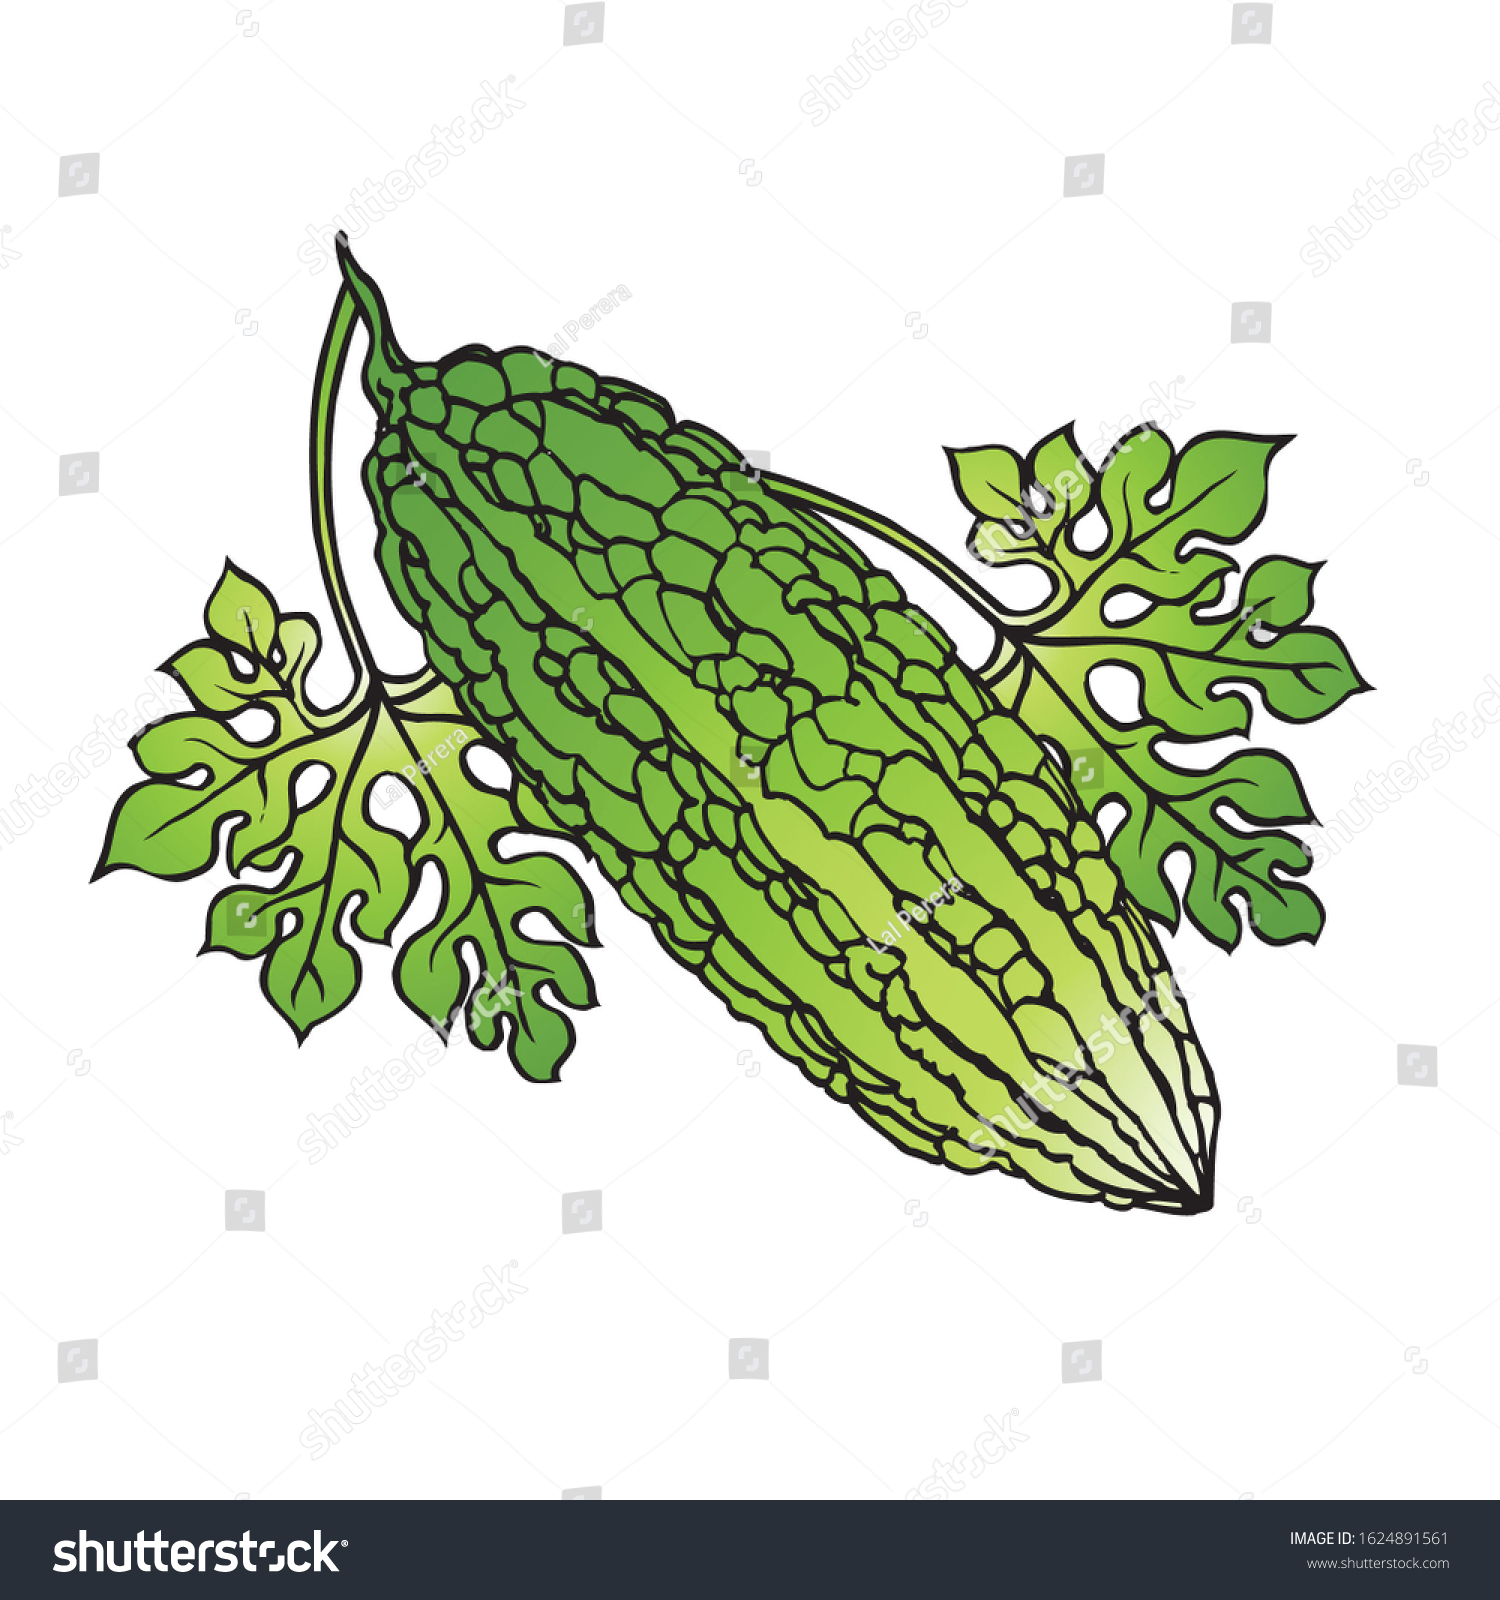 Isolated Bitter Gourd Drawing Leaves Stock Illustration 1624891561